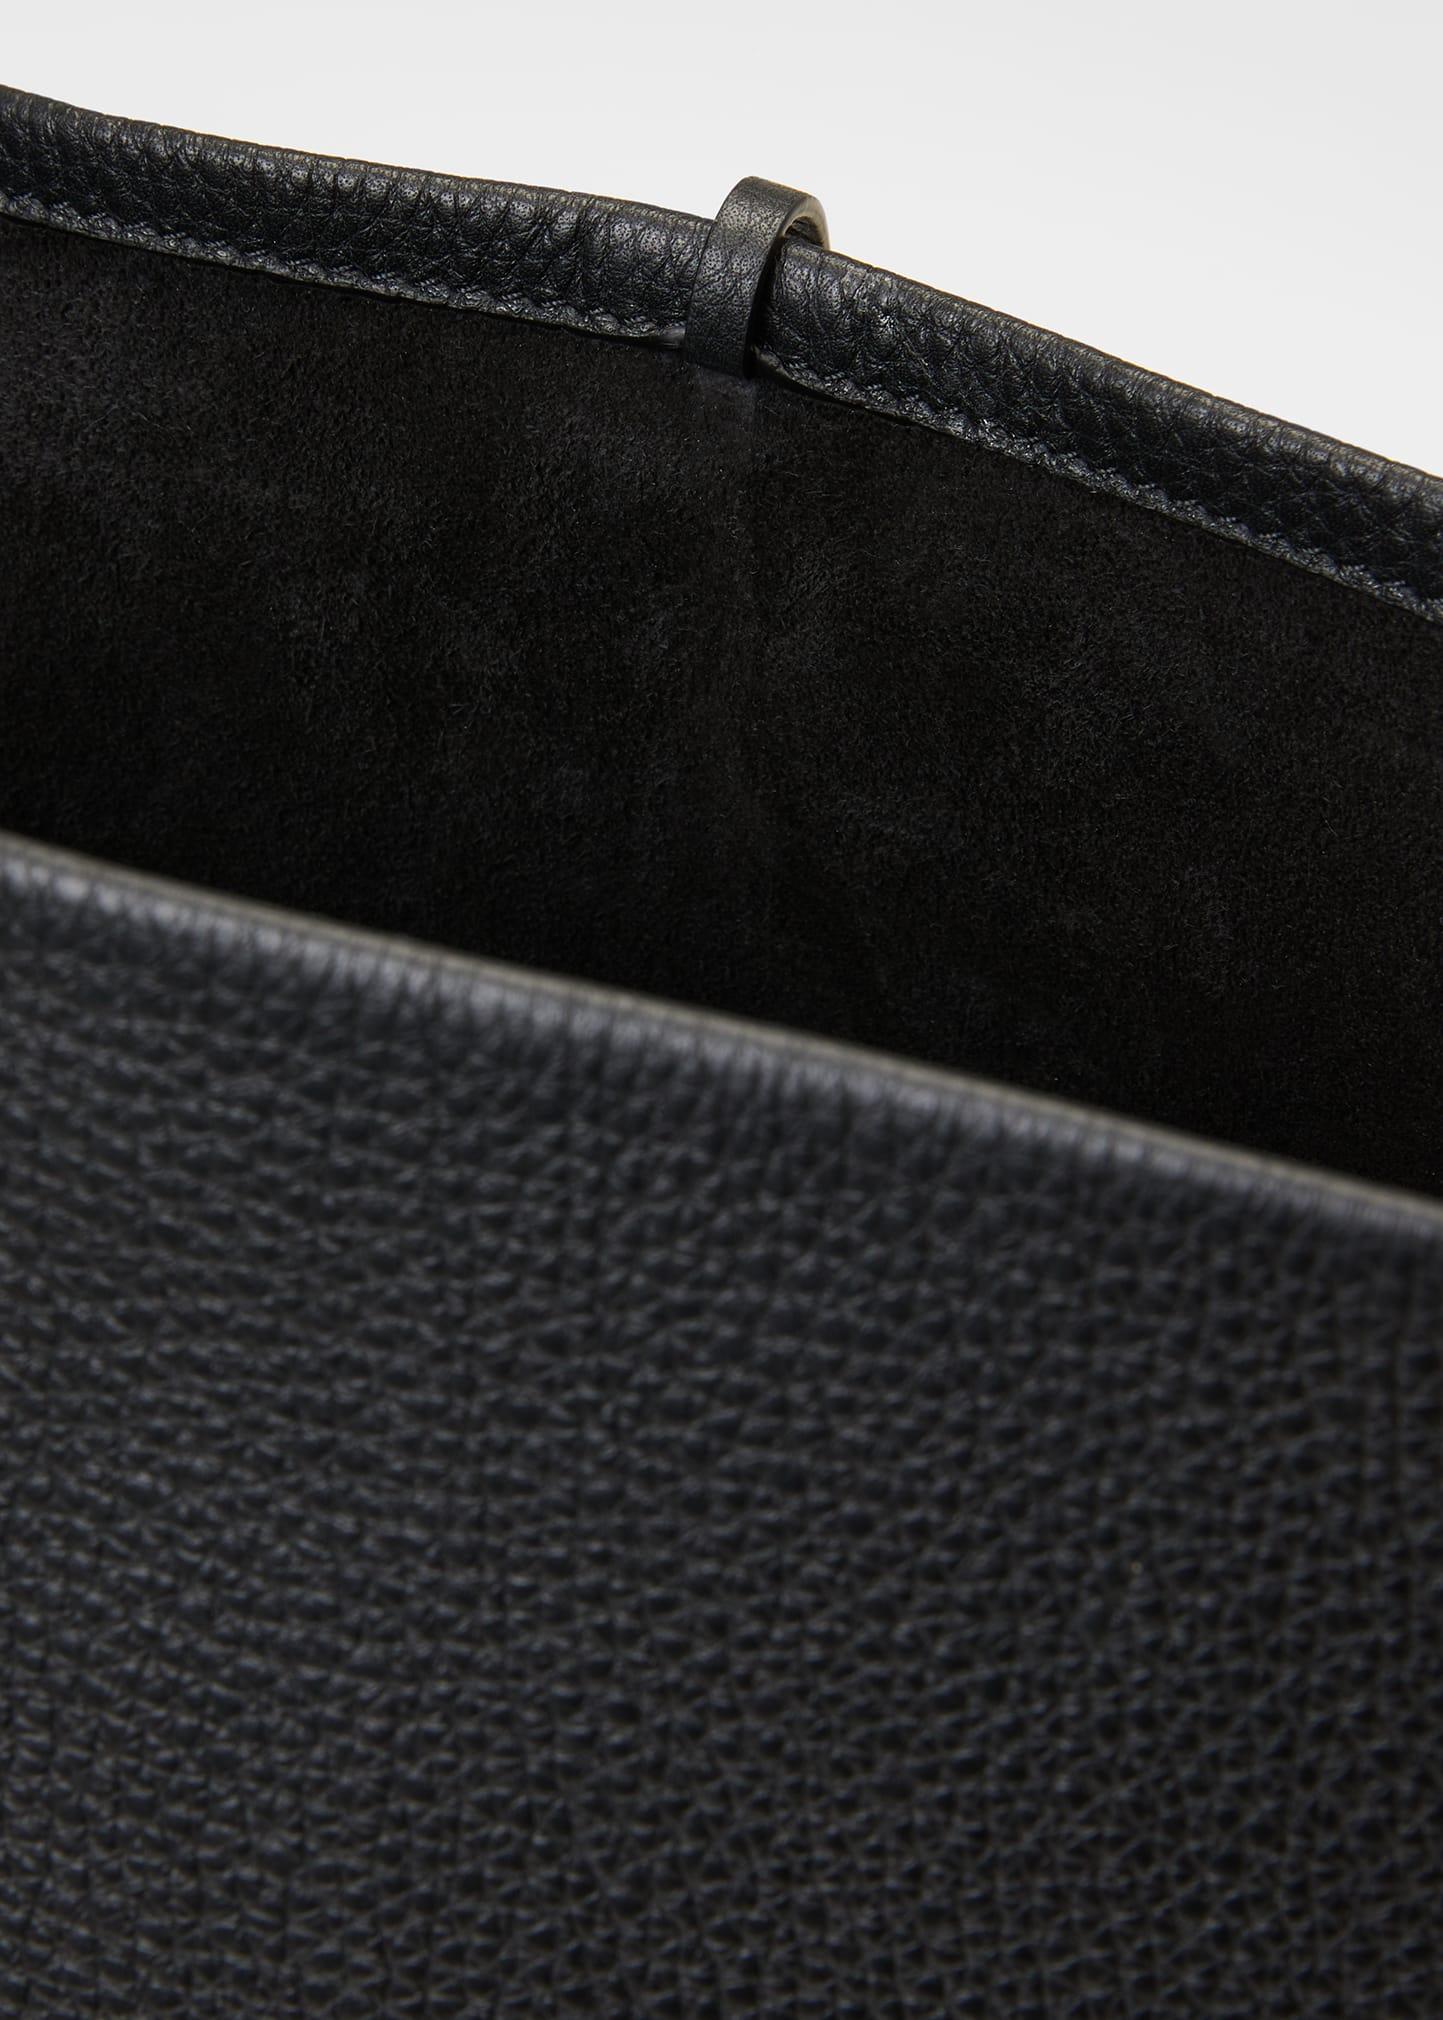 The Row N/s Park Medium Textured-leather Tote in Black